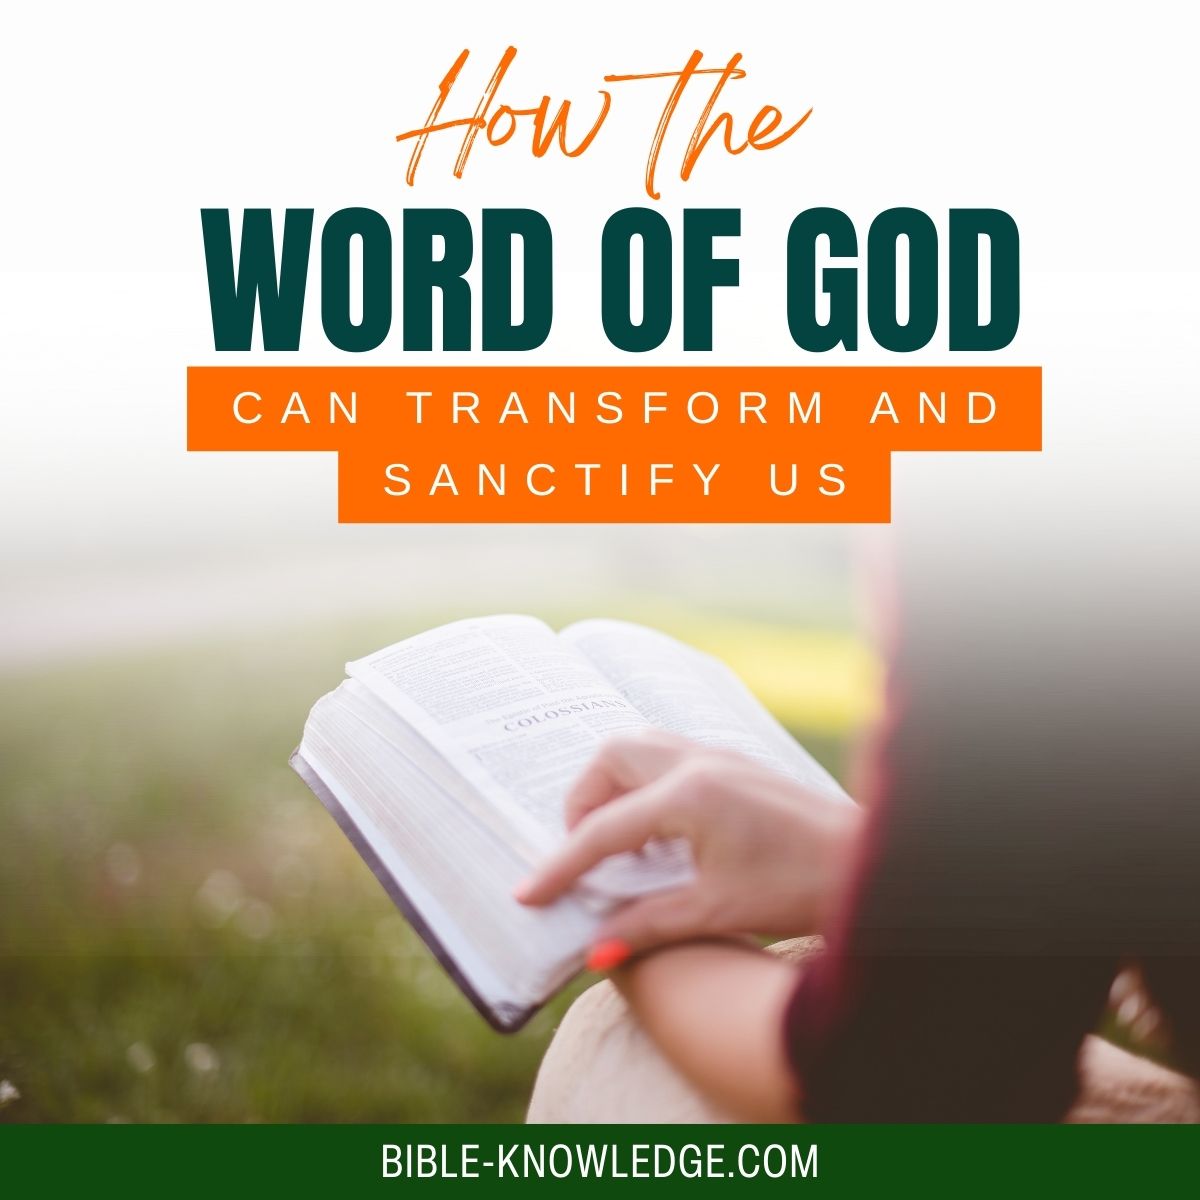 How The Word of God Can Transform and Sanctify Us